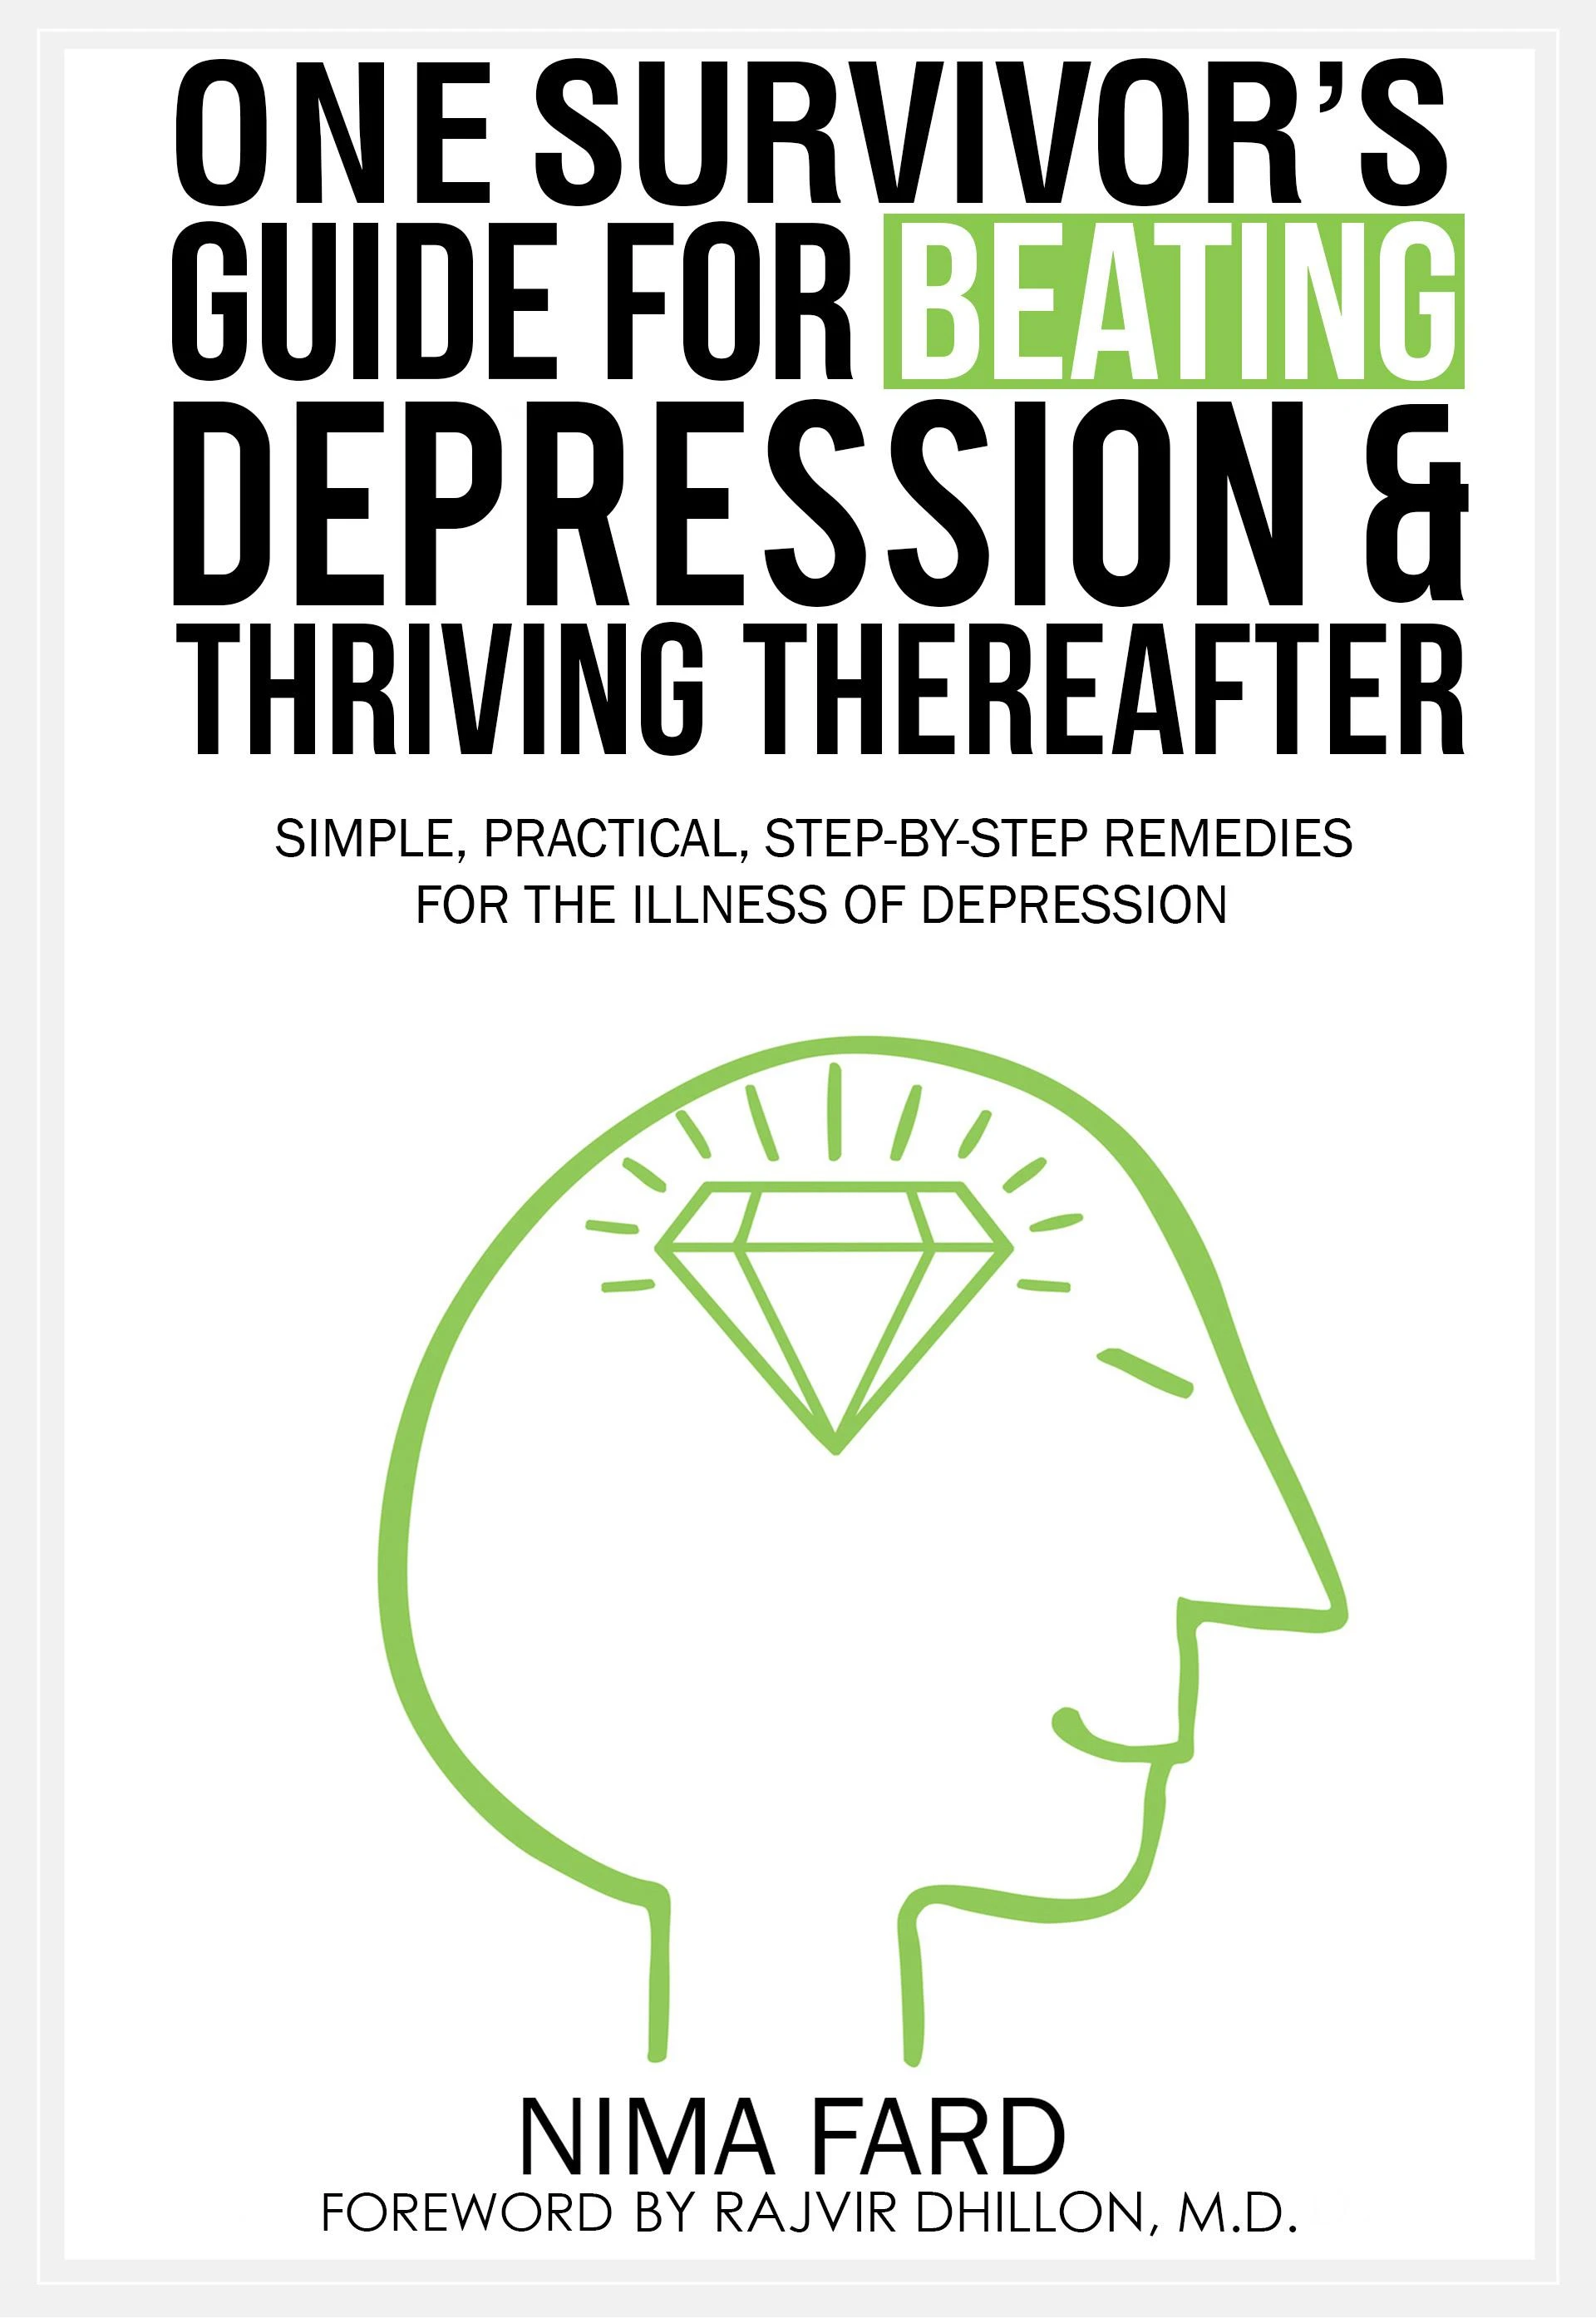 One Survivor’s Guide for Beating Depression and Thriving Thereafter